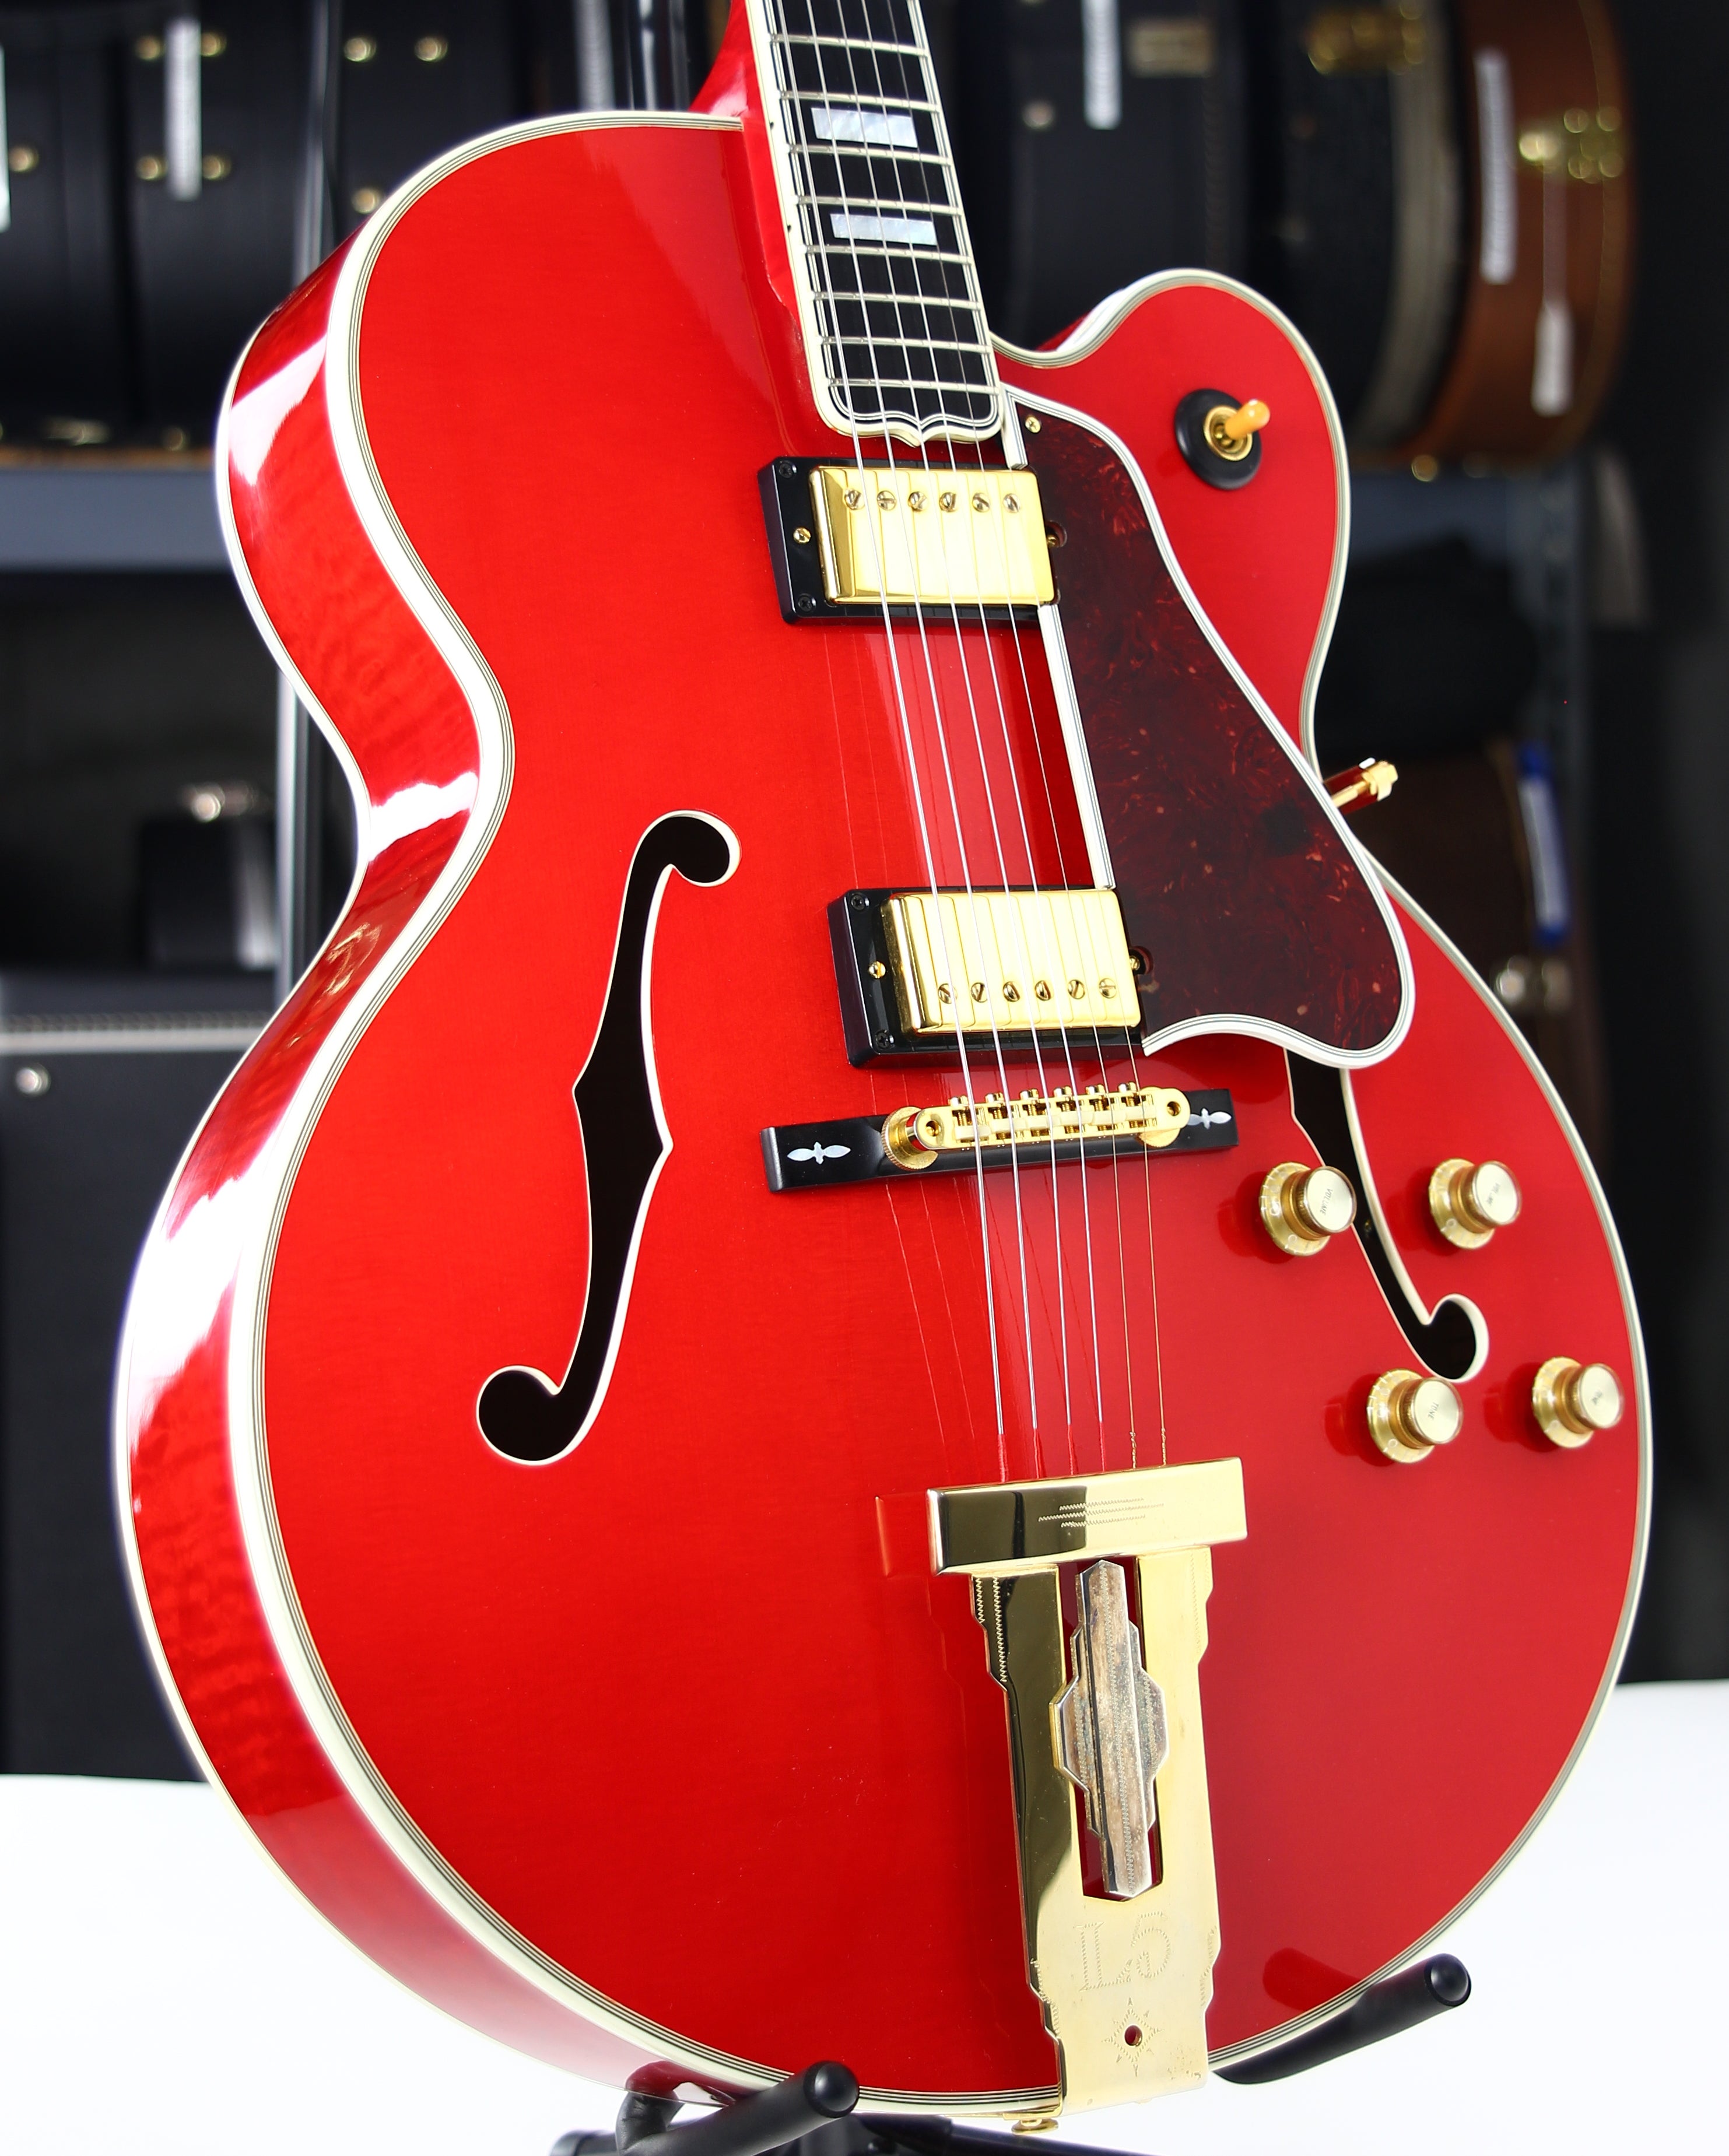 *SOLD*  2004 Gibson Custom Shop L-5 CES Faded Cherry James Hutchins, Calton Case Archtop Jazz L5 Guitar